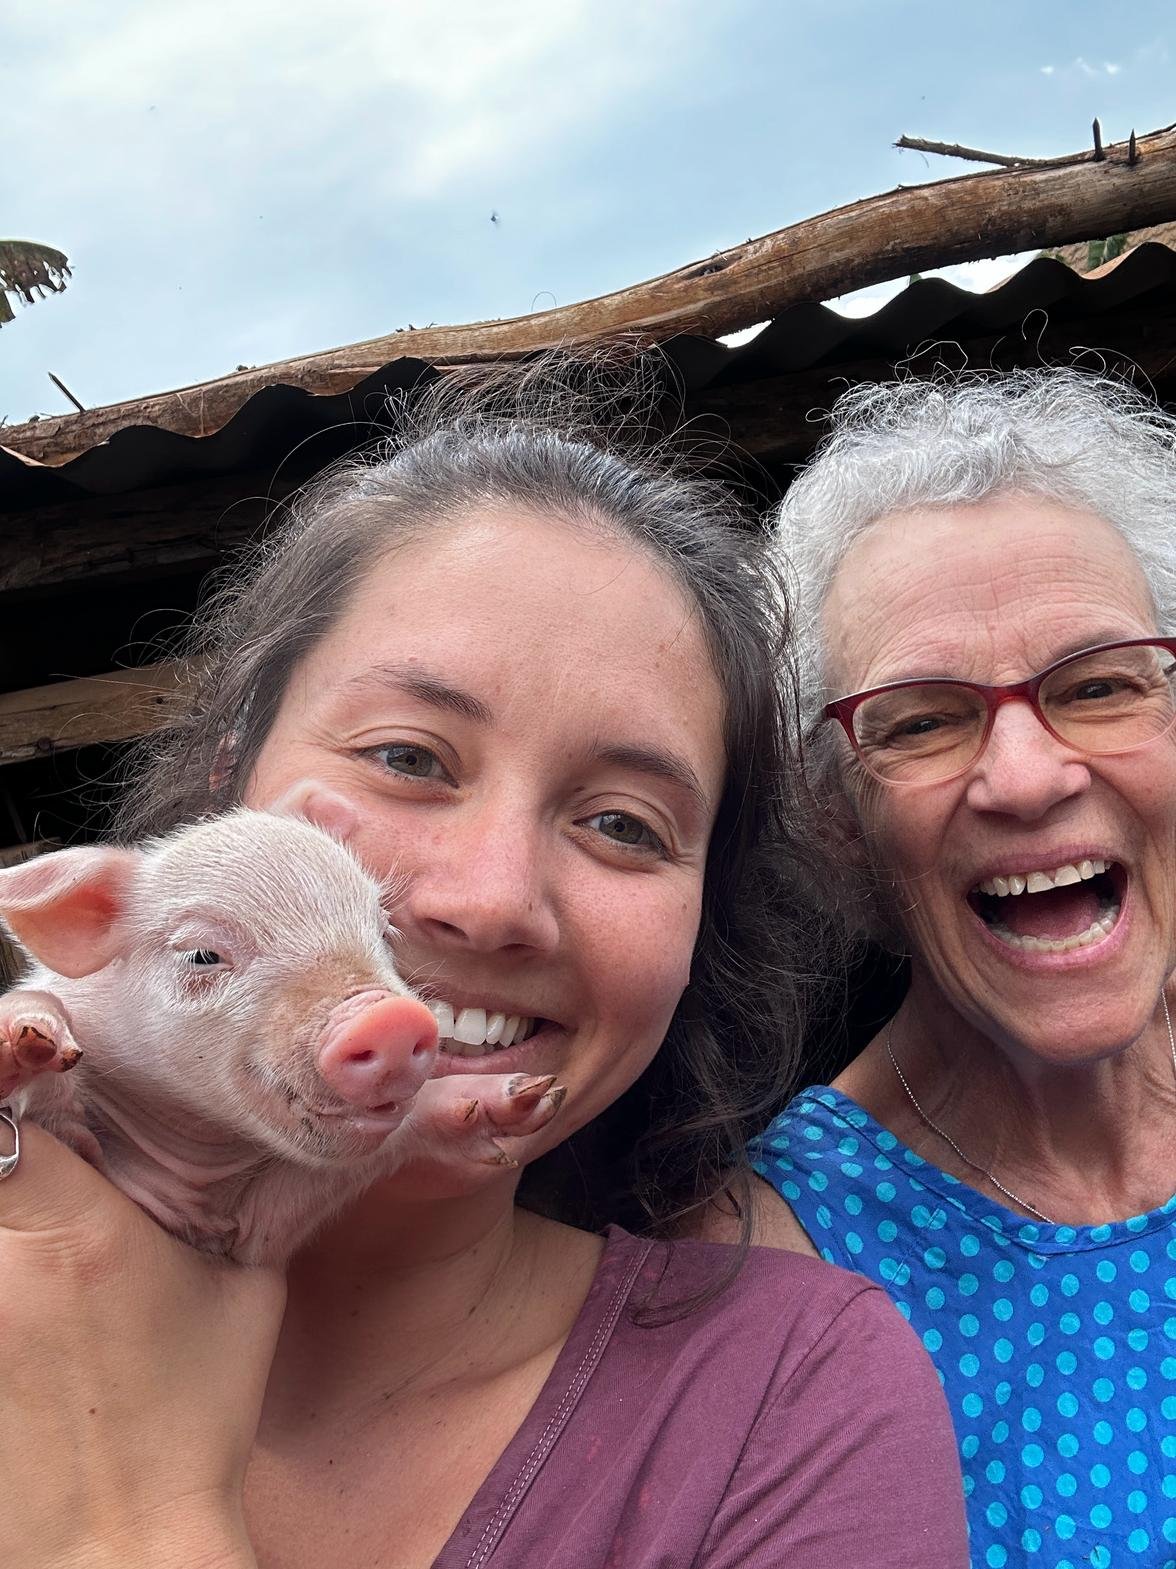 Charlotte and Ellie with piglet.jpg